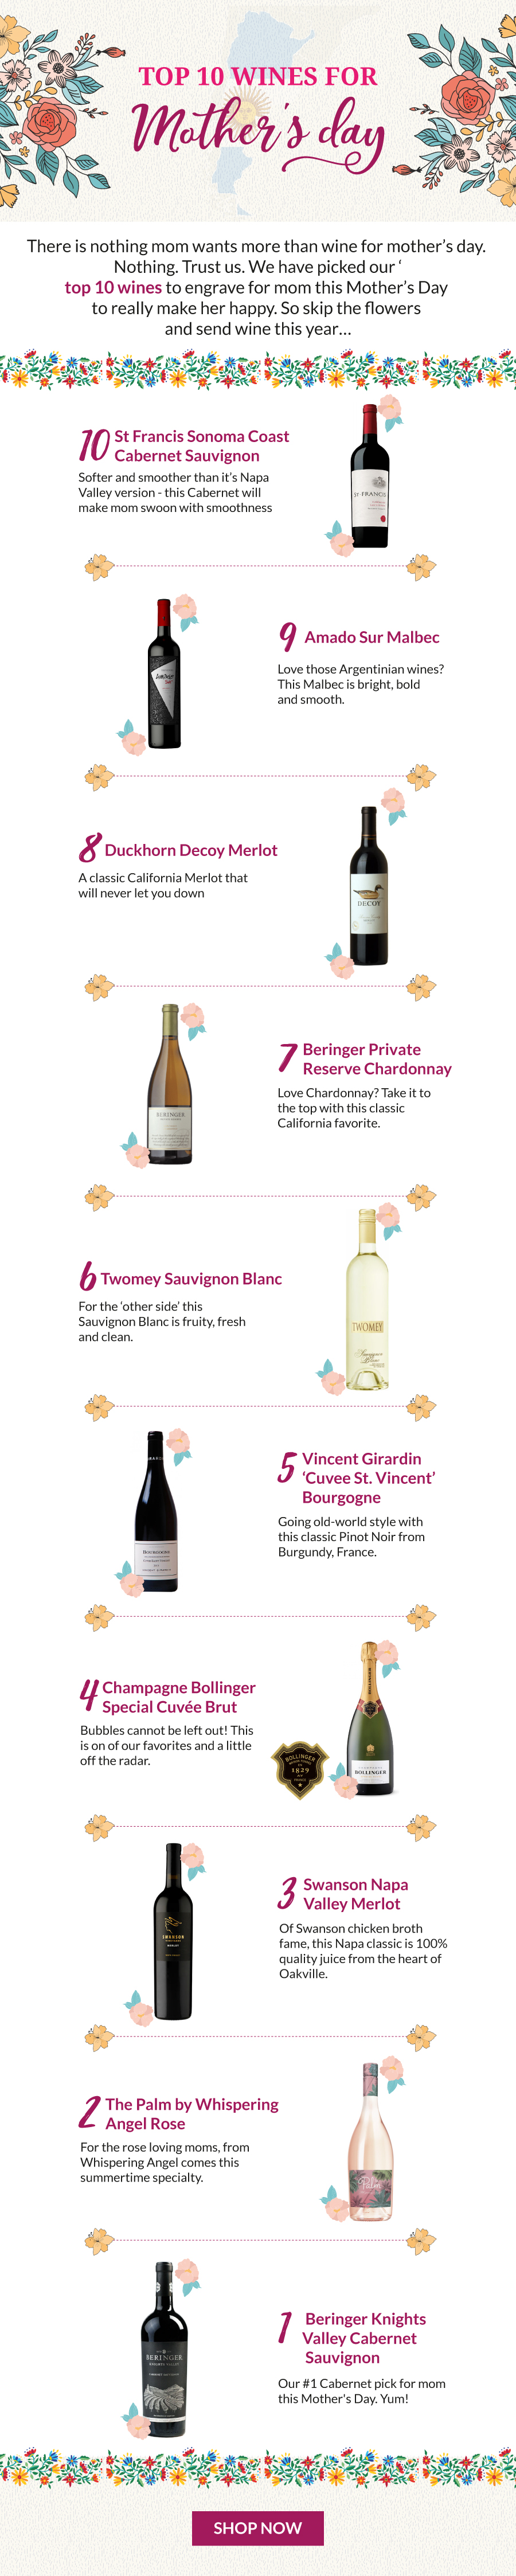 Top10 Wines For Mother's Day